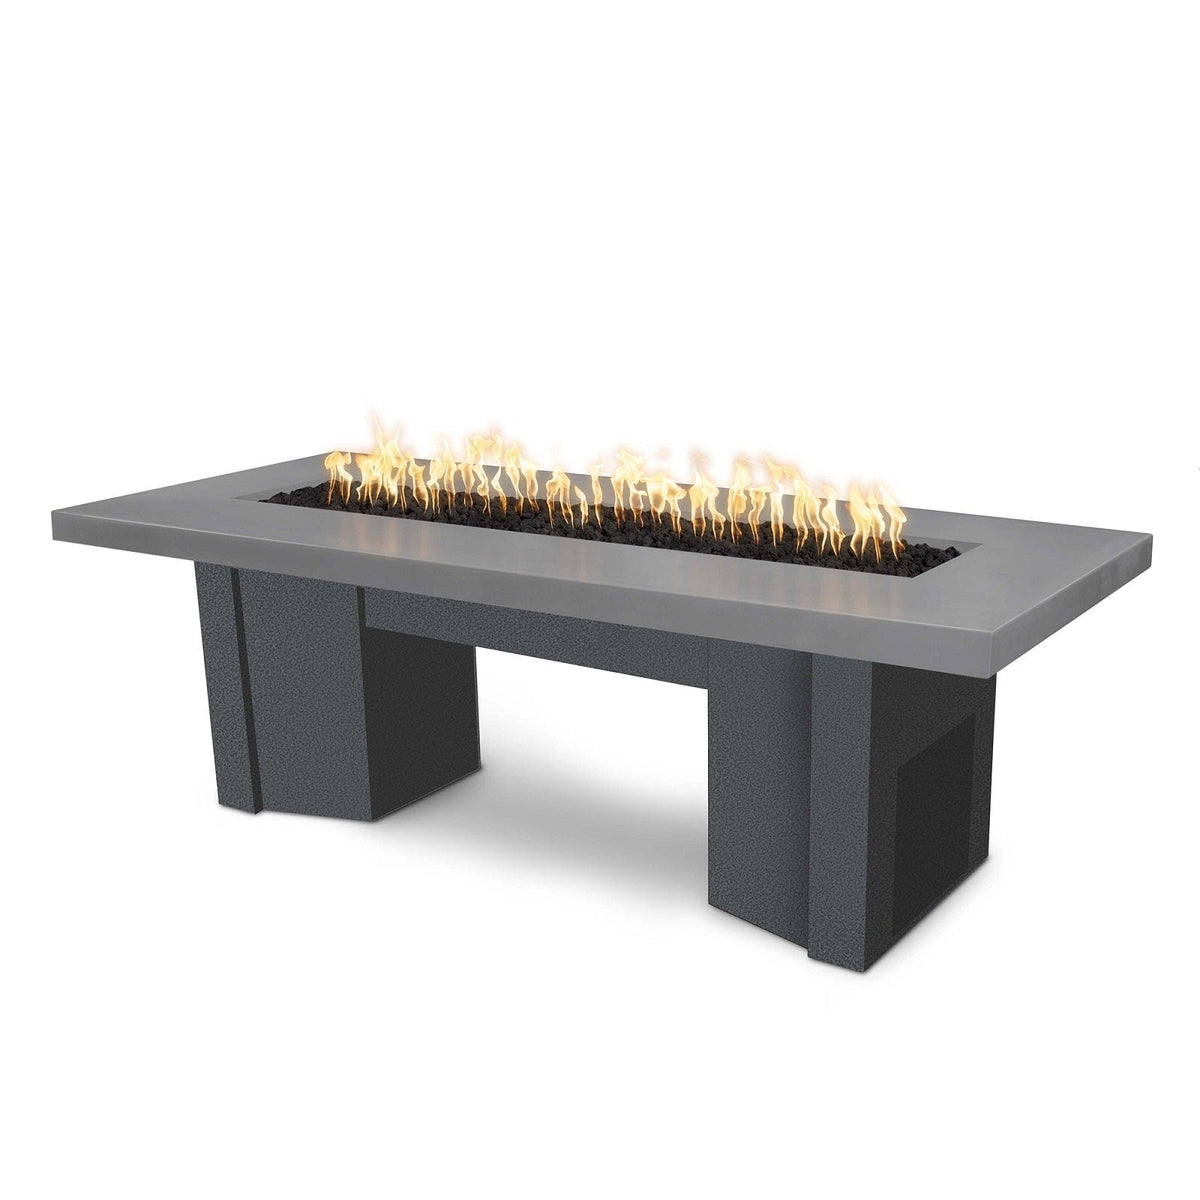 The Outdoor Plus Fire Features Natural Gray (-NGY) / Silver Vein Powder Coated Steel (-SLV) The Outdoor Plus 60&quot; Alameda Fire Table Smooth Concrete in Natural Gas - Match Lit / OPT-ALMGFRC60-NG